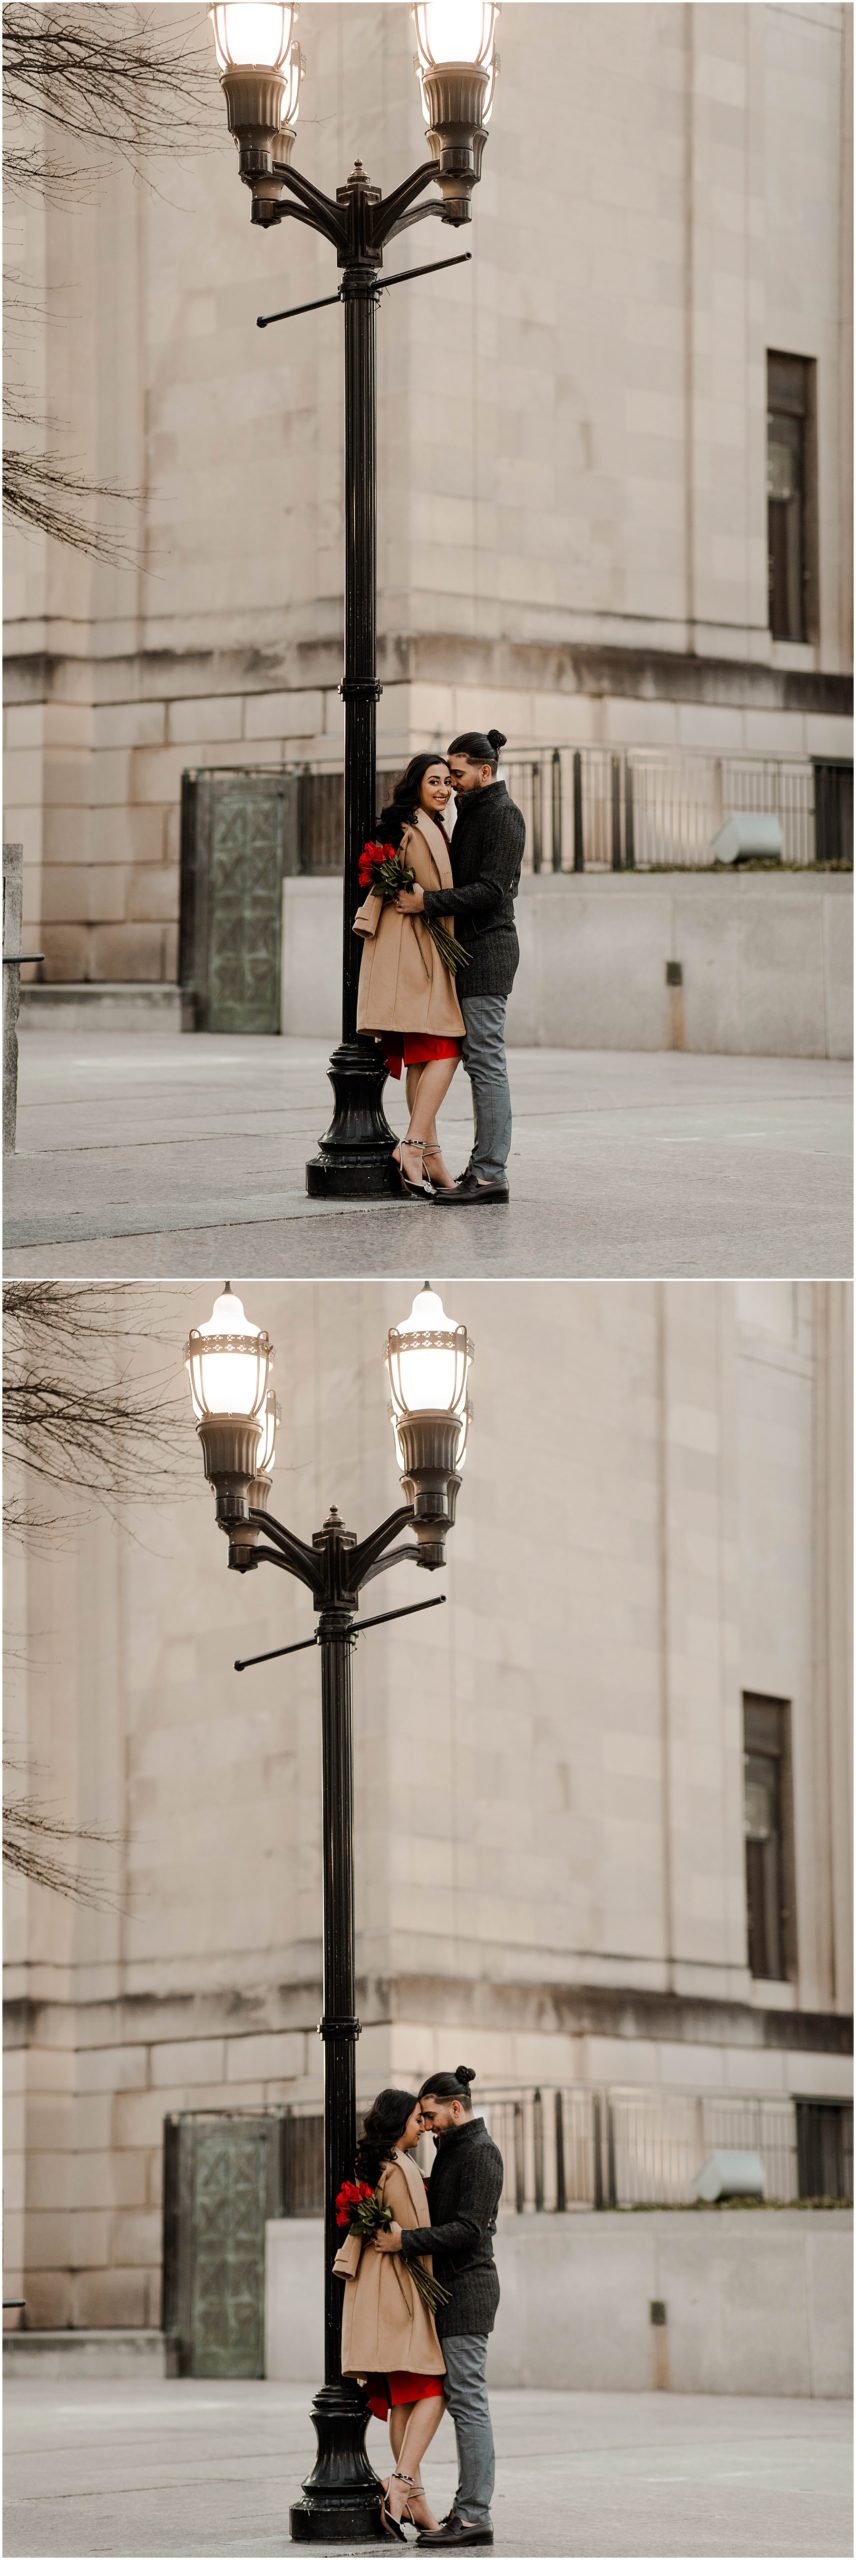 Couple in front of lamppost at Nashville War Memorial Building